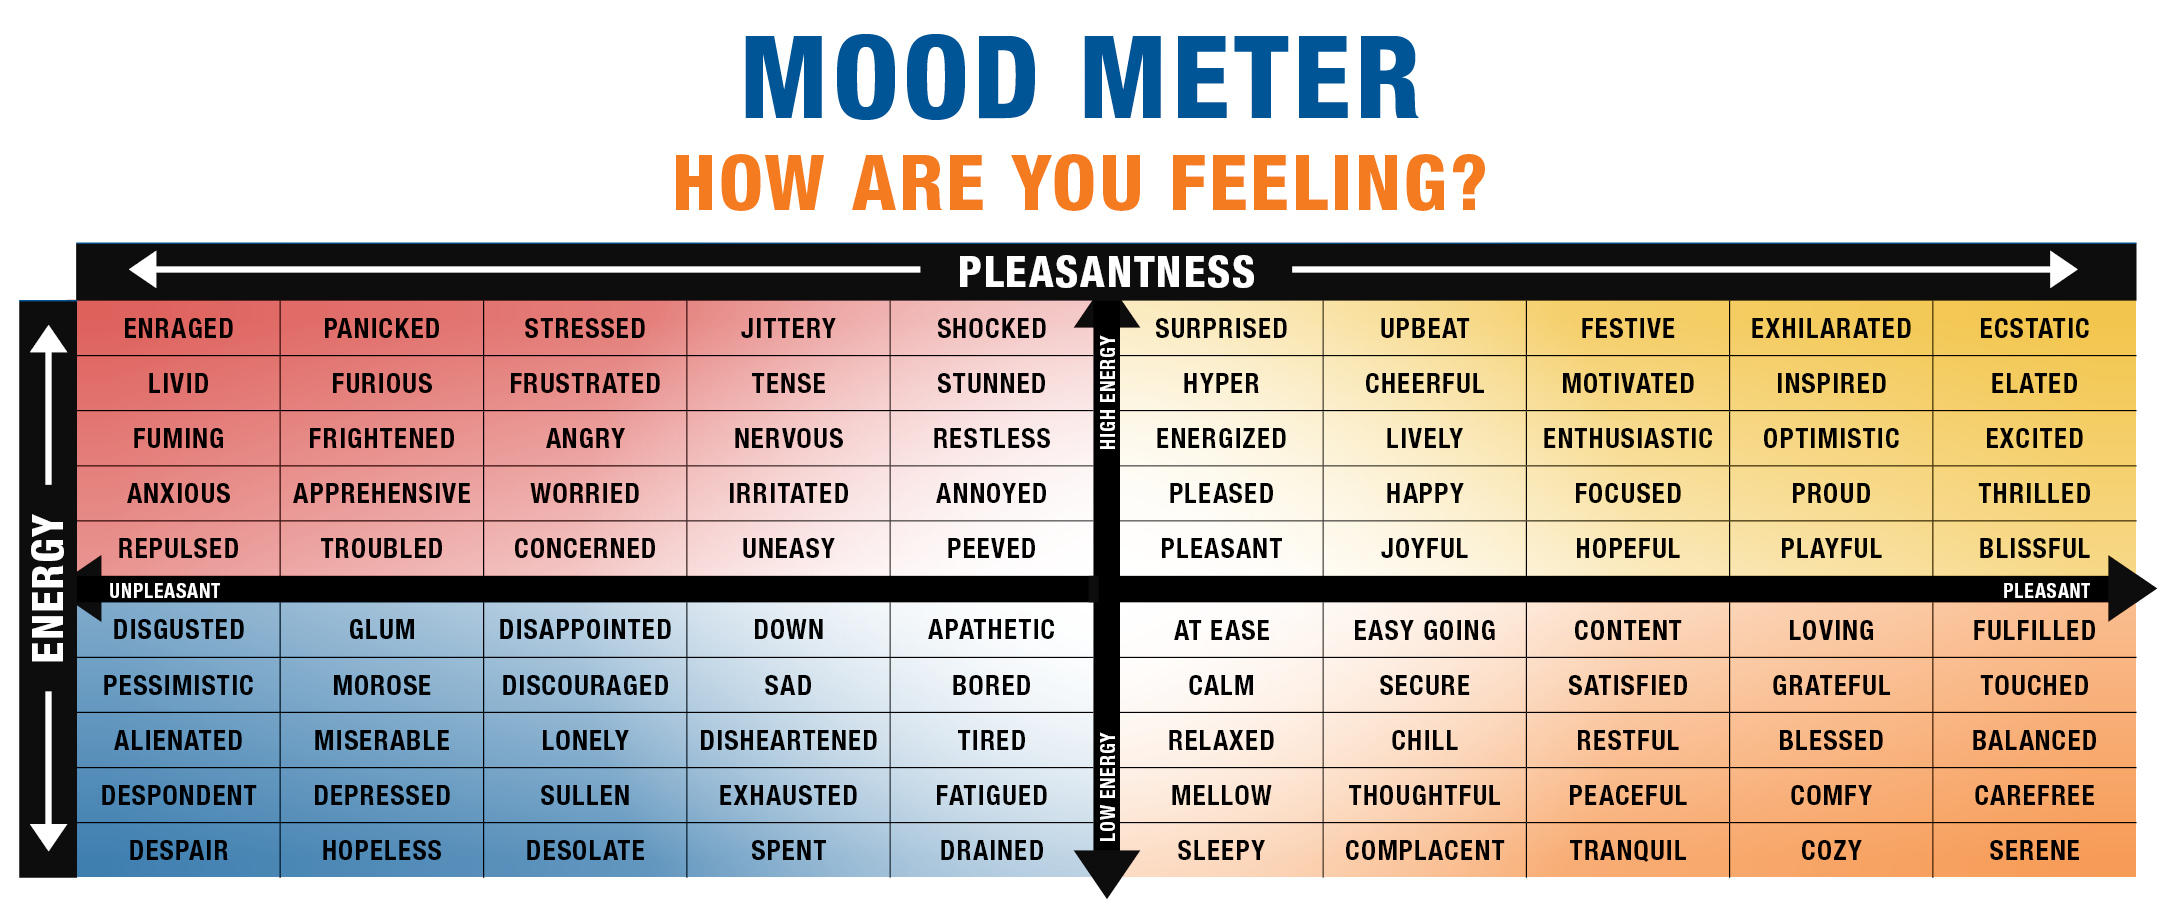 Mood Meter How Are You Feeling